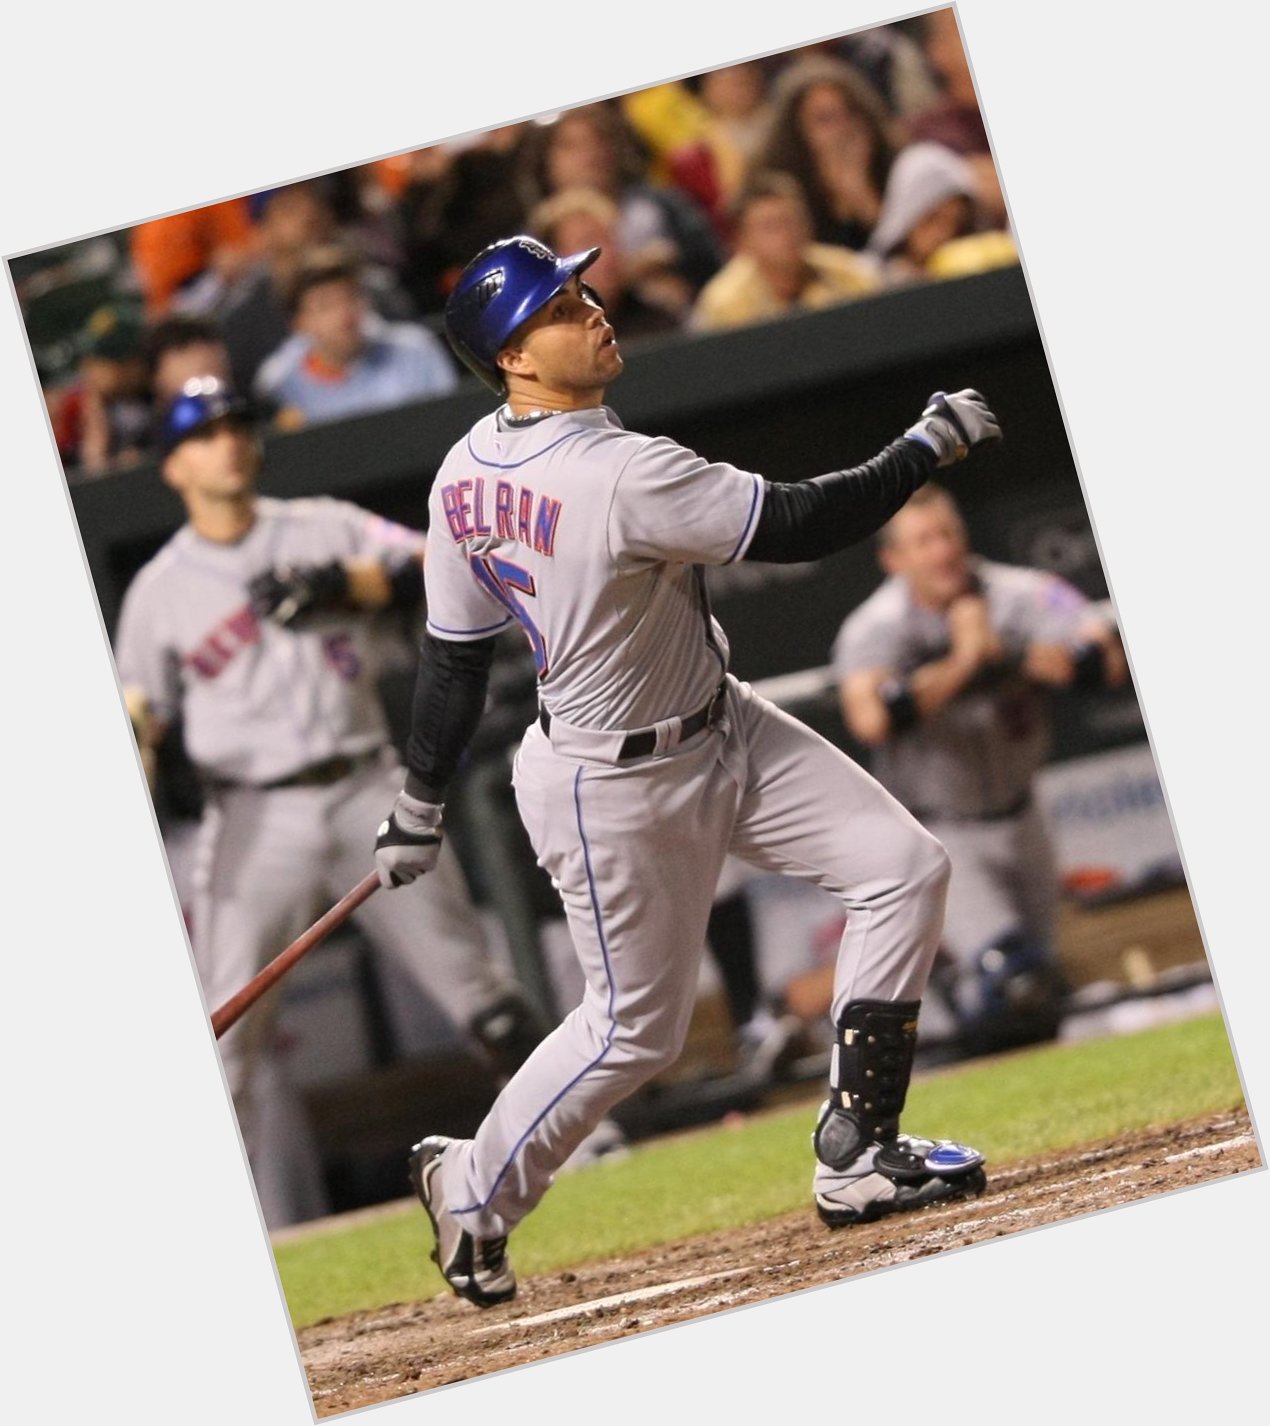 Happy 38th birthday to future Hall of Stats member Carlos Beltran (111th w/130 Hall Rating).  